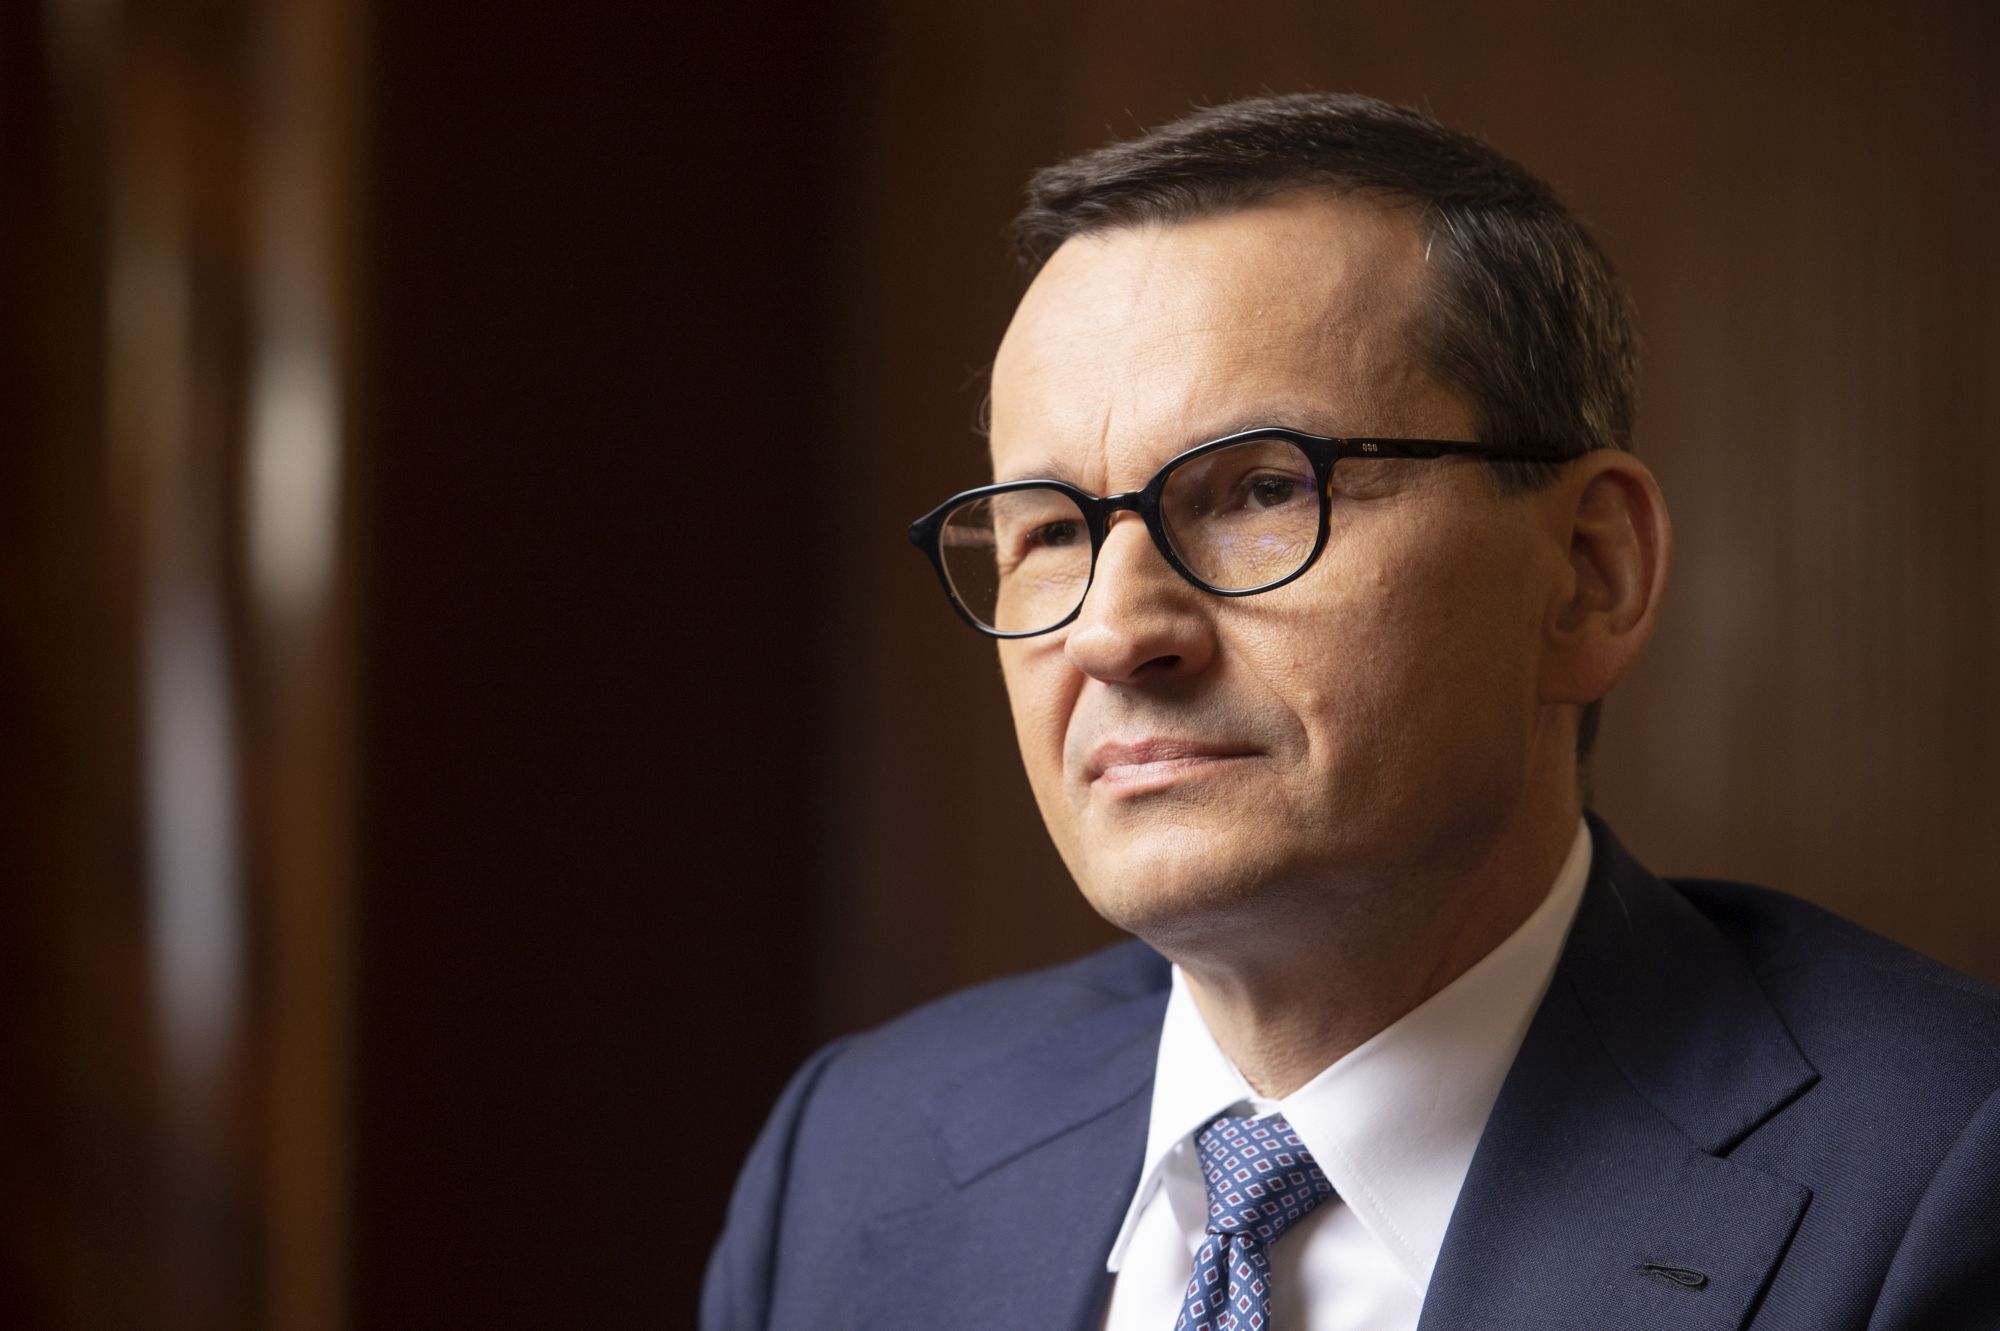 Morawiecki tells us what the government will do about reparations